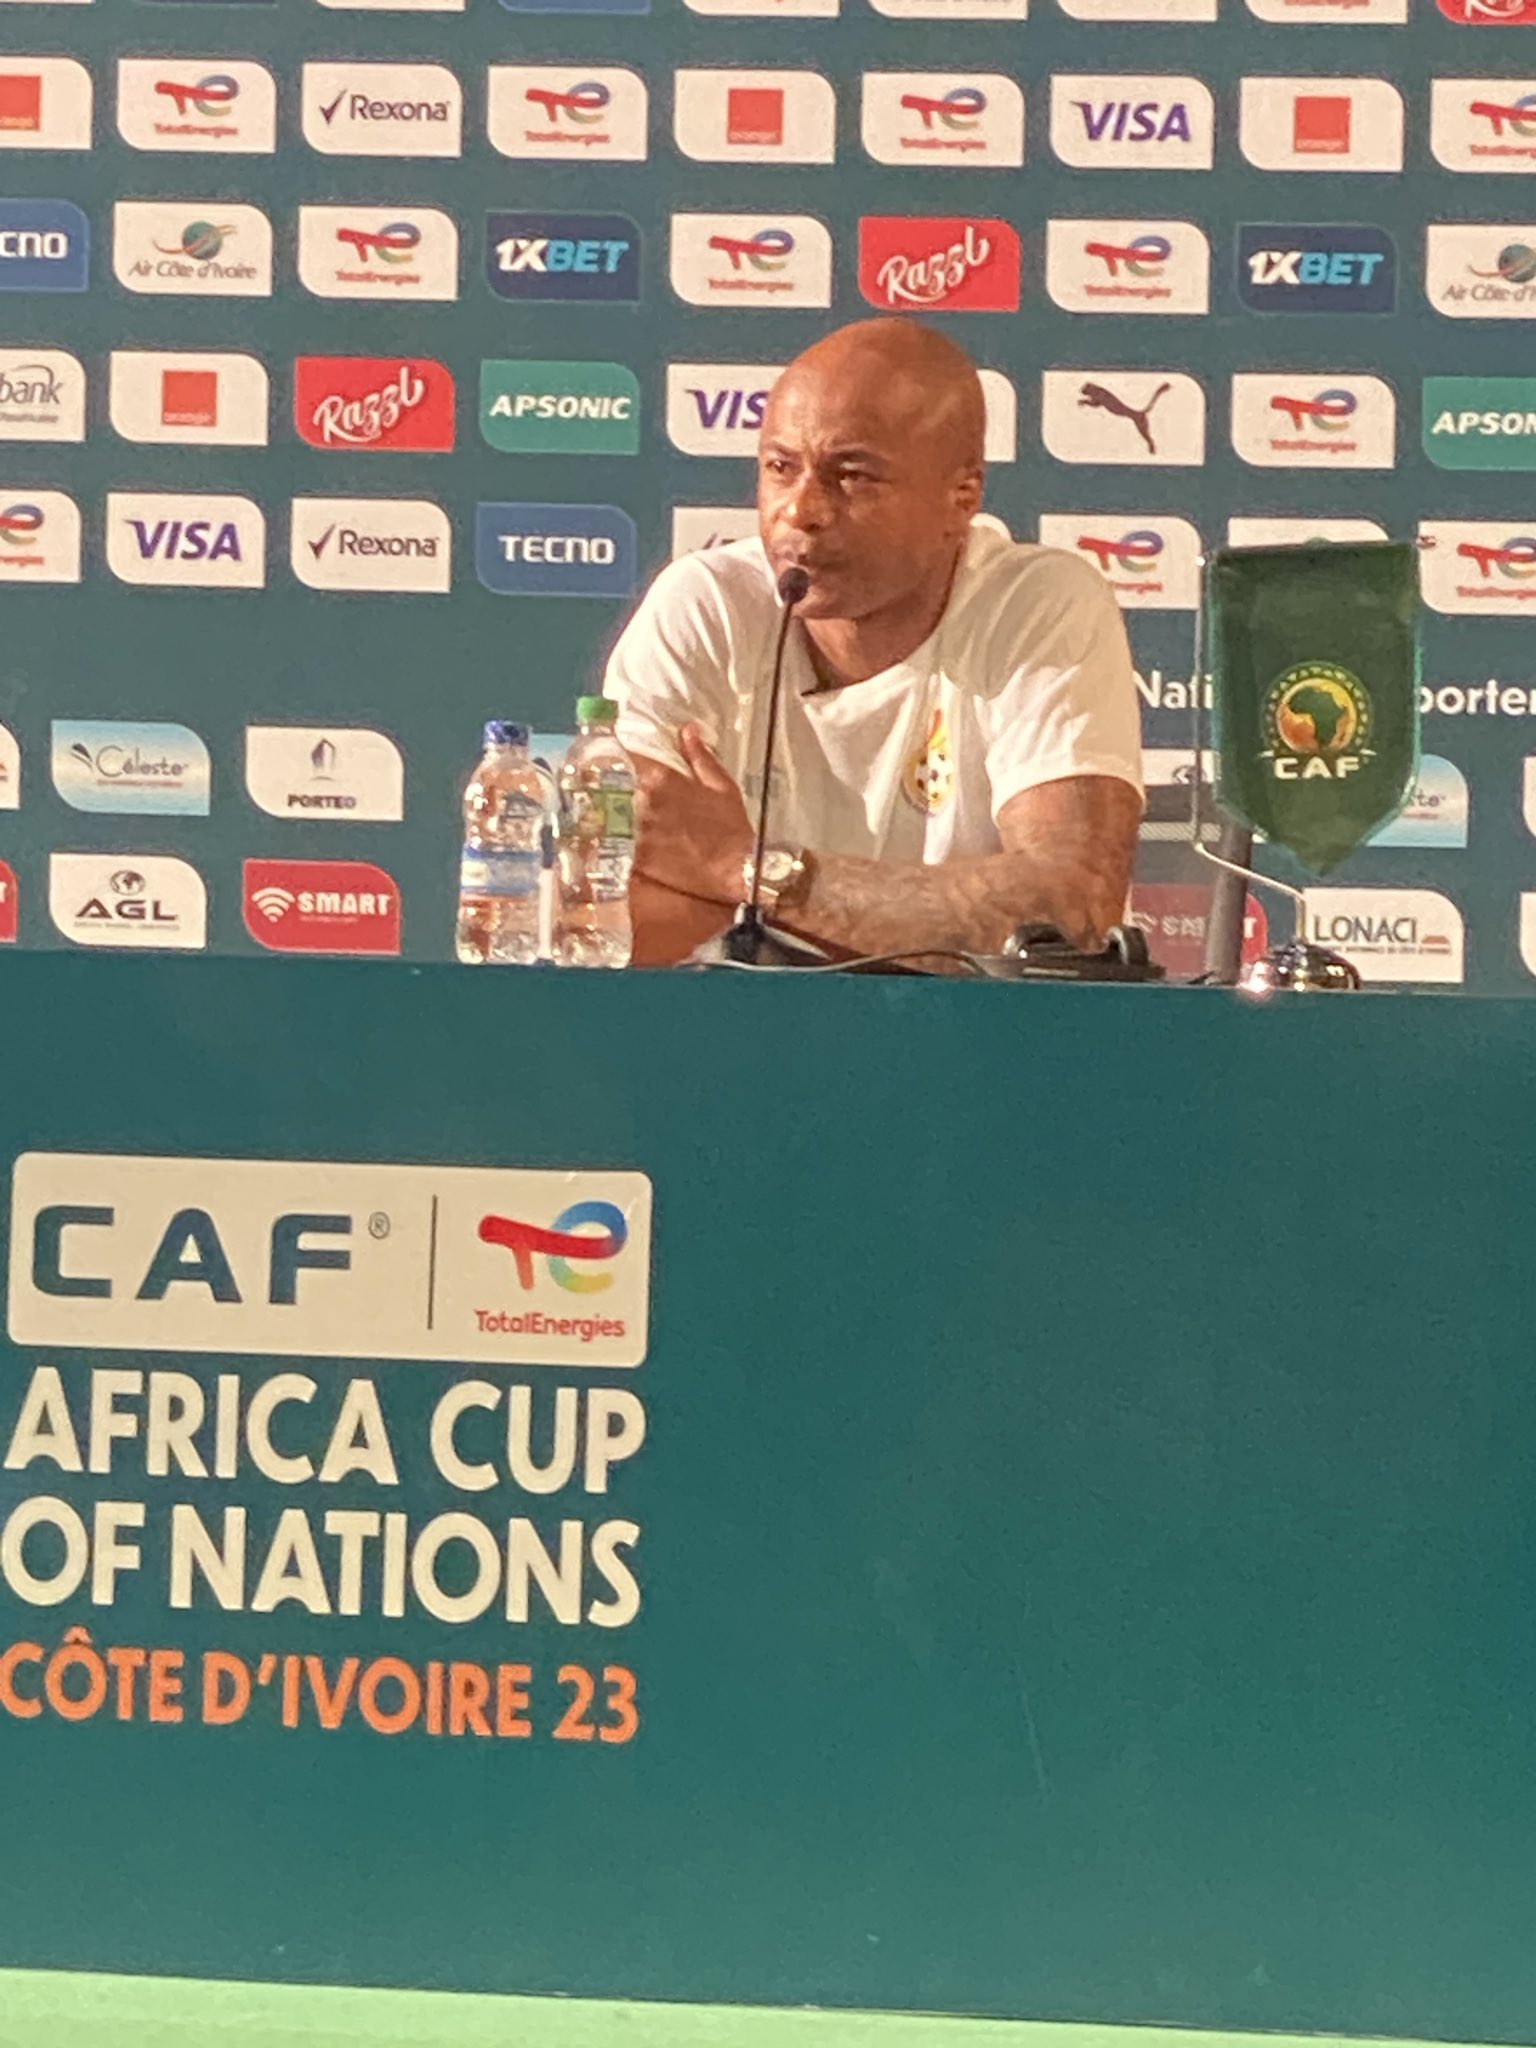 Andre Dede Ayew, -” We have the ambition to lift this trophy”